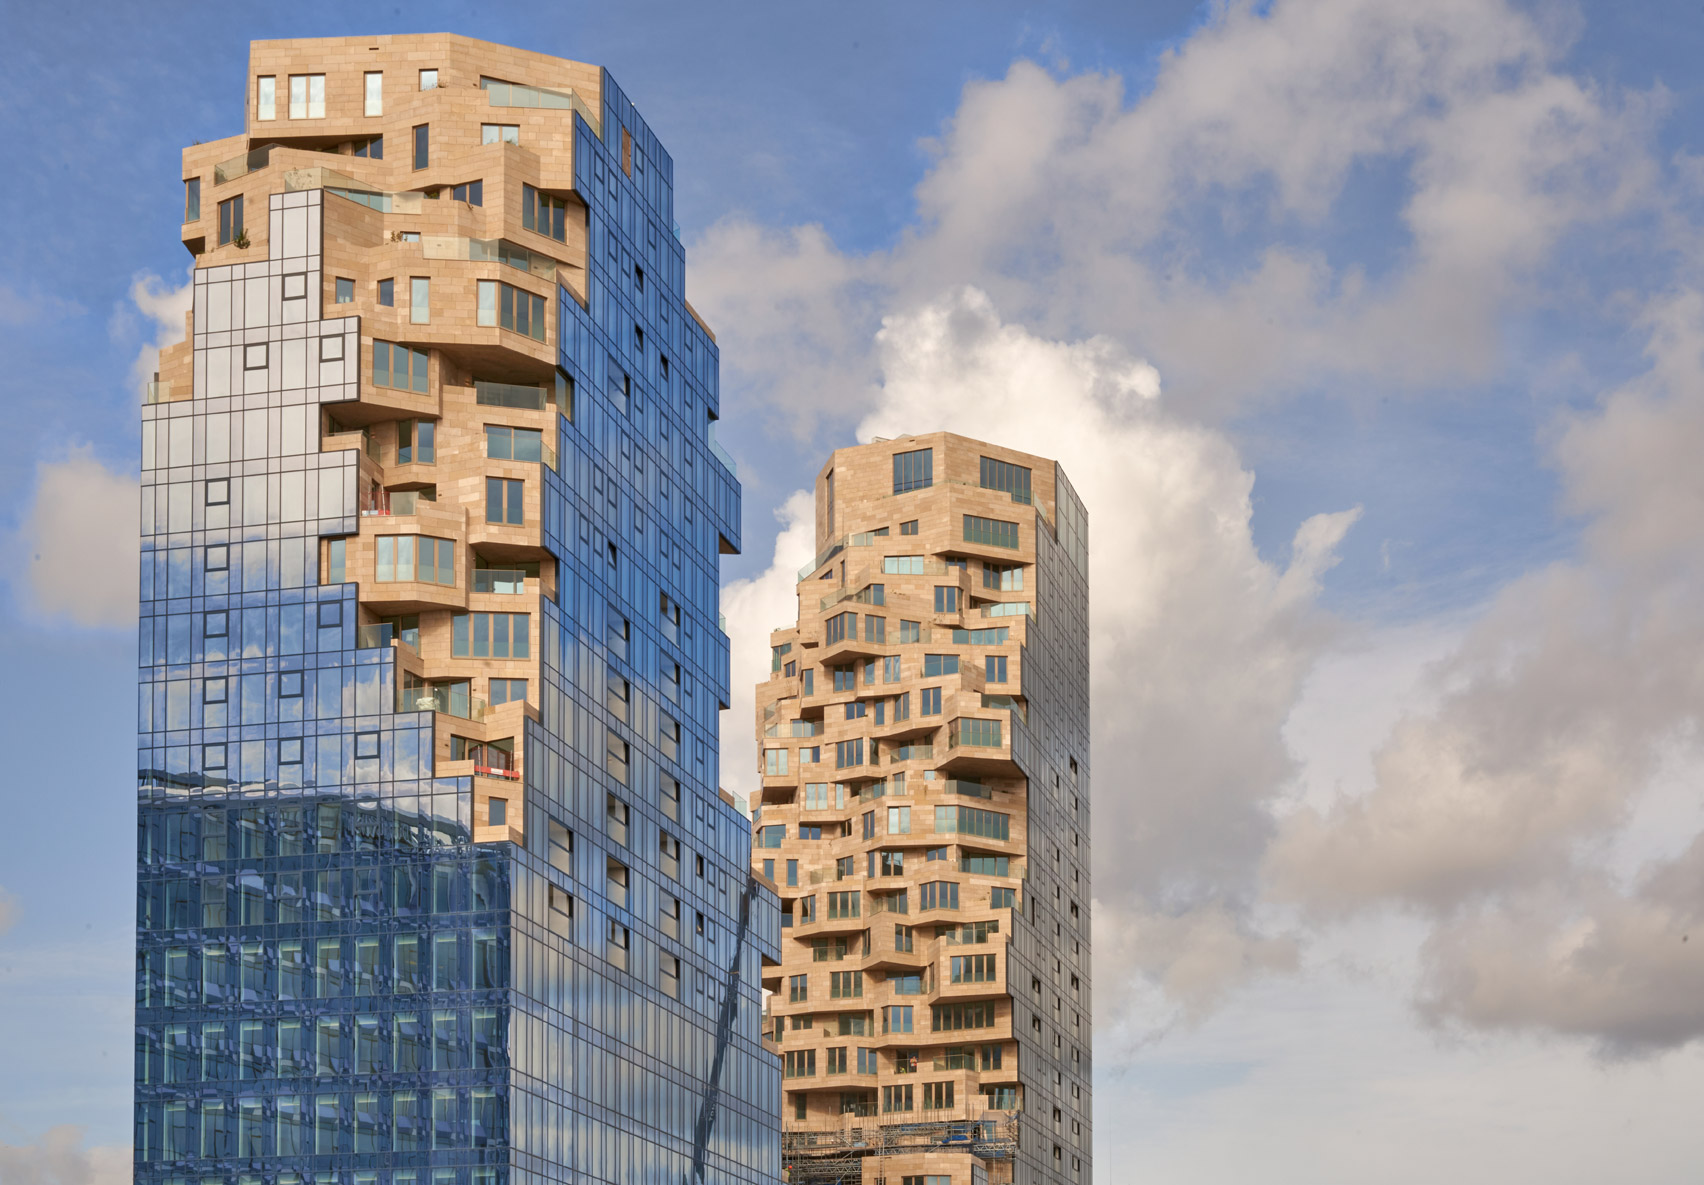 Mixed-use high-rise in Amsterdam